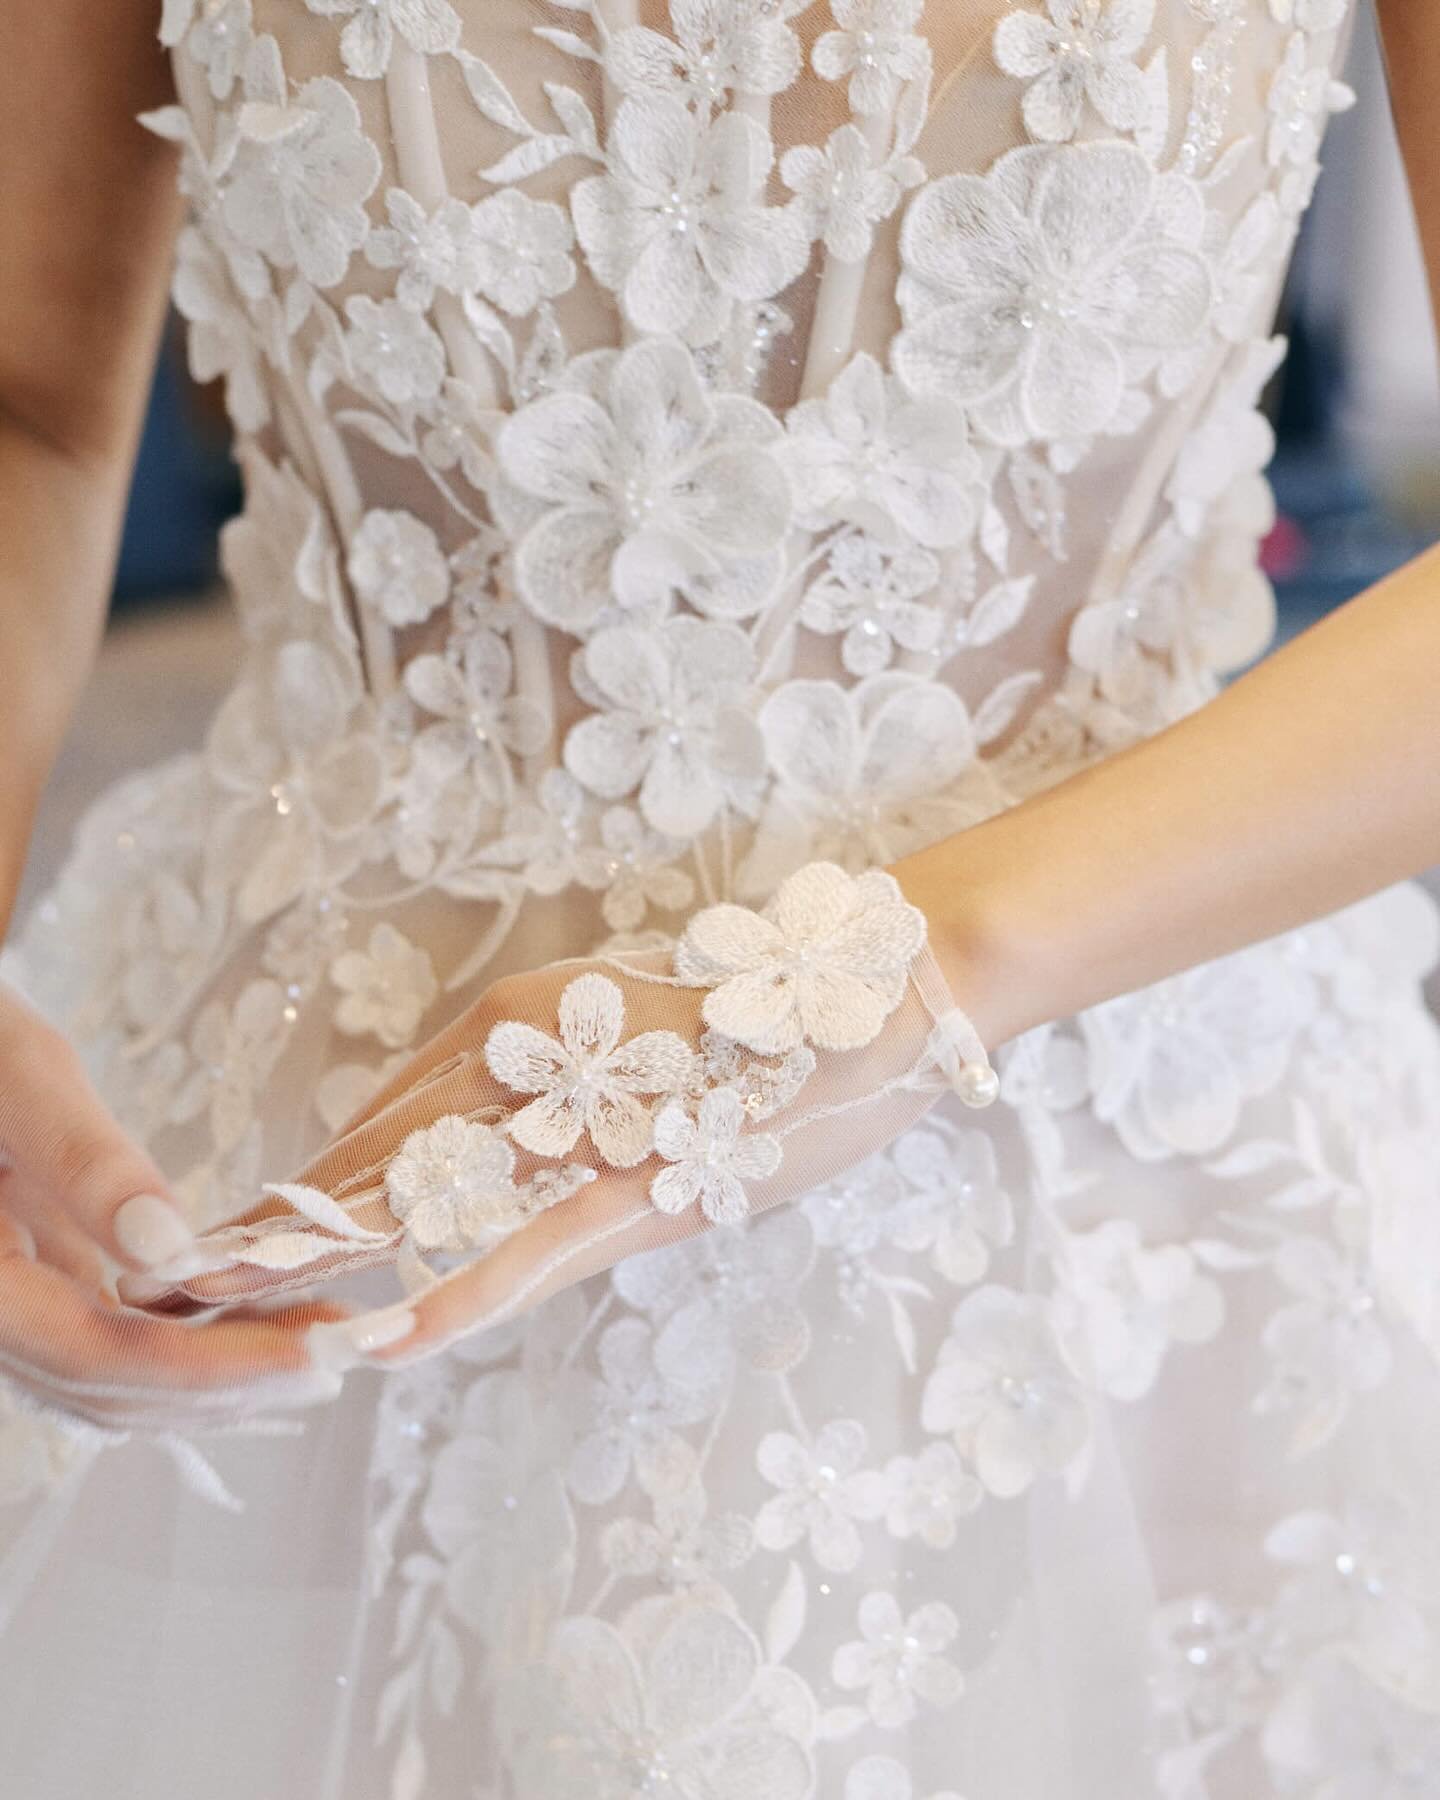 Forever obsessed with the delicate details 🕊️ 

🤍 shooting for @serenity.photographyau